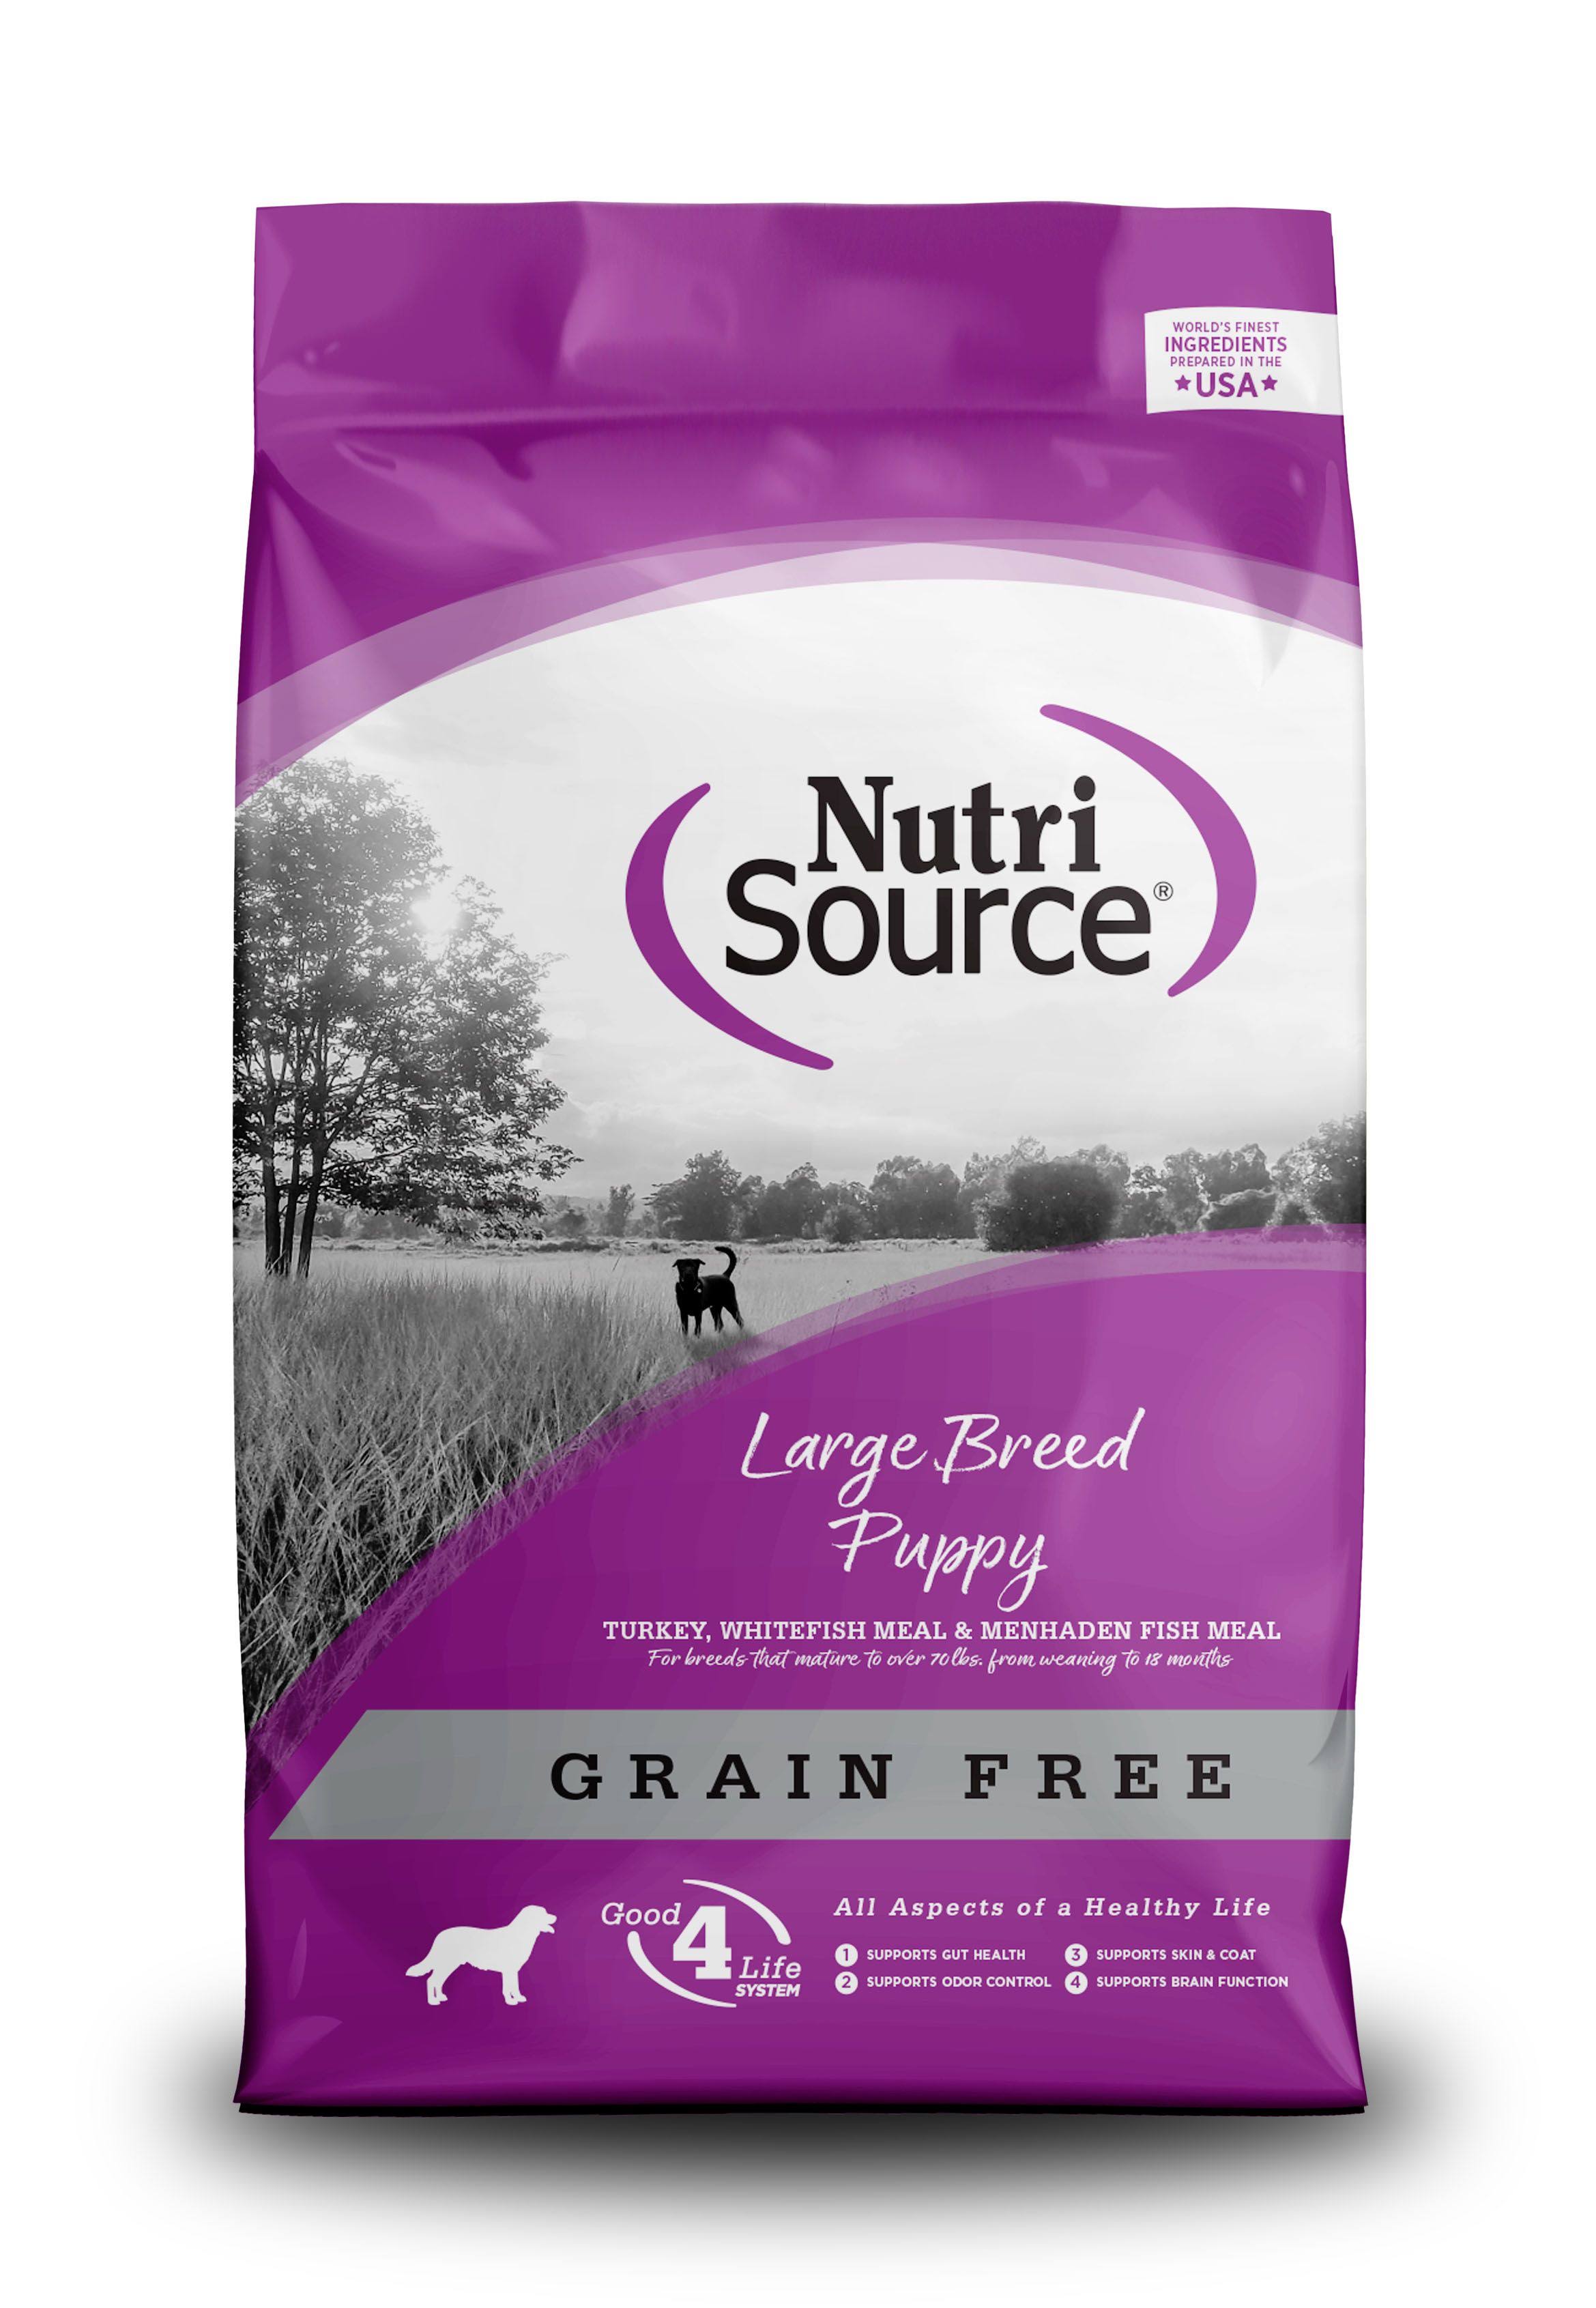 NutriSource Dog Food | Grain Free | 30lb Large Breed Puppy | 30lb